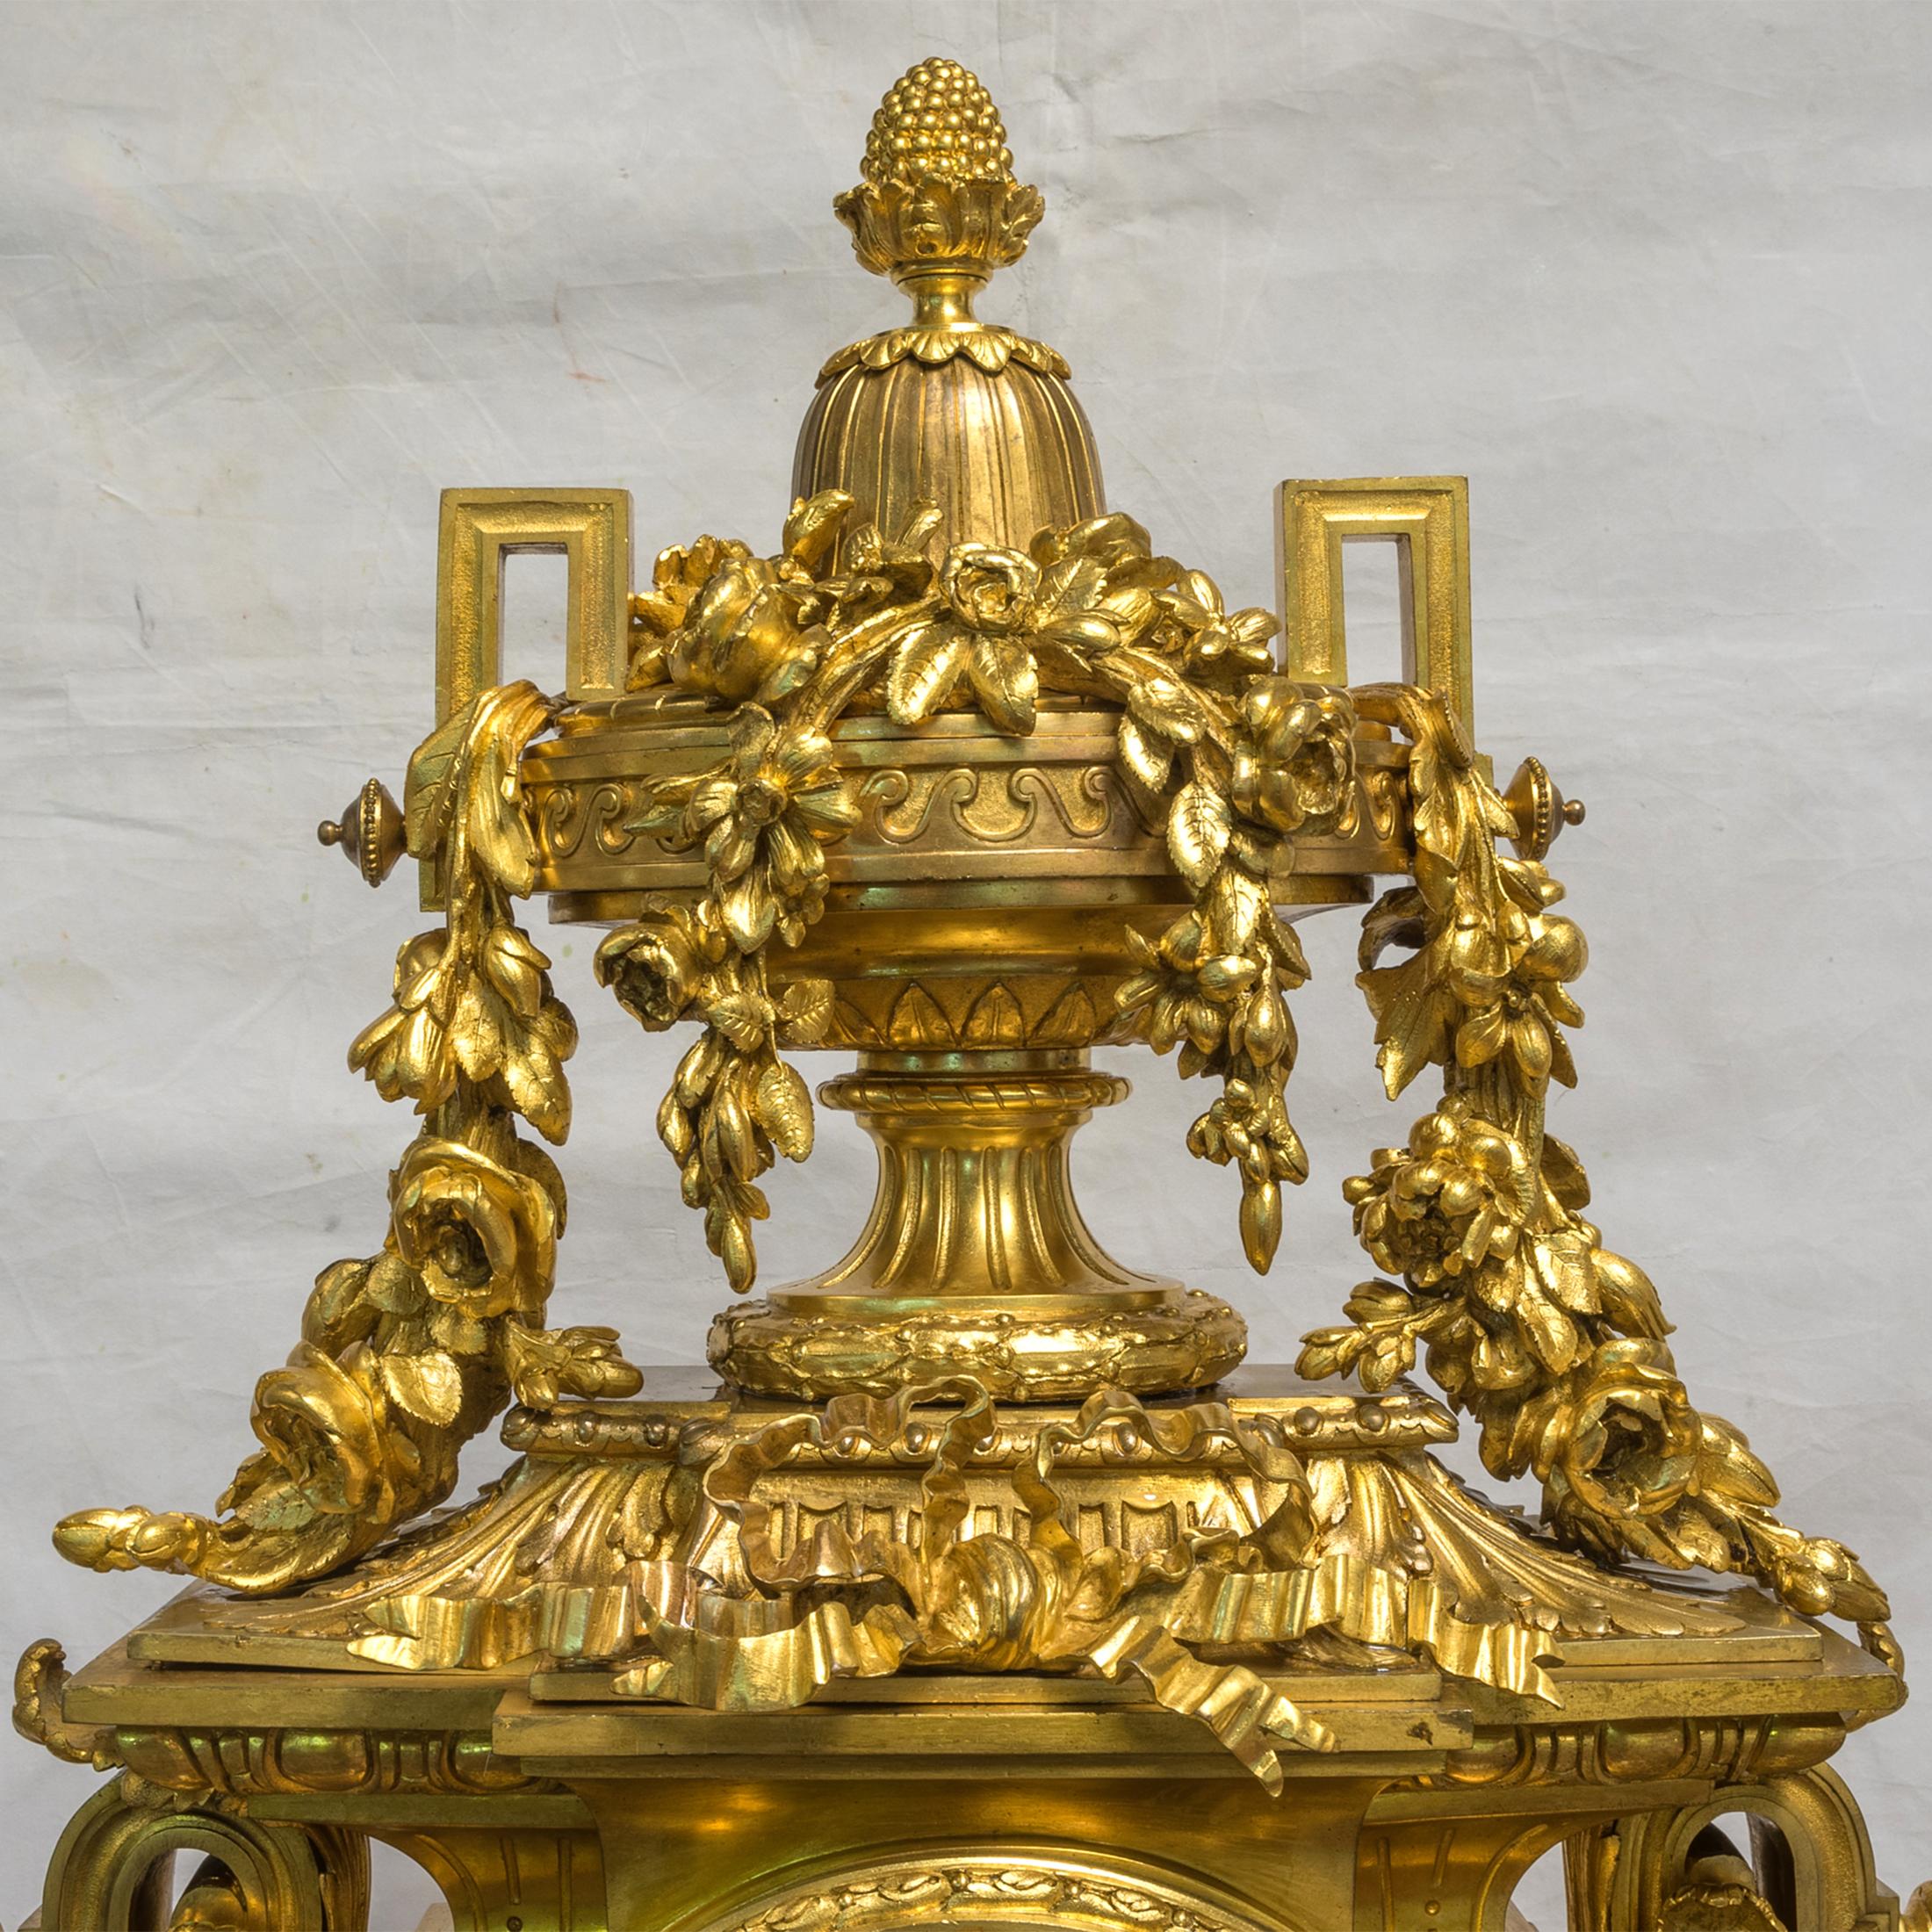 Monumental 19th Century French Three-Piece Ormolu Clock Garniture In Good Condition For Sale In New York, NY